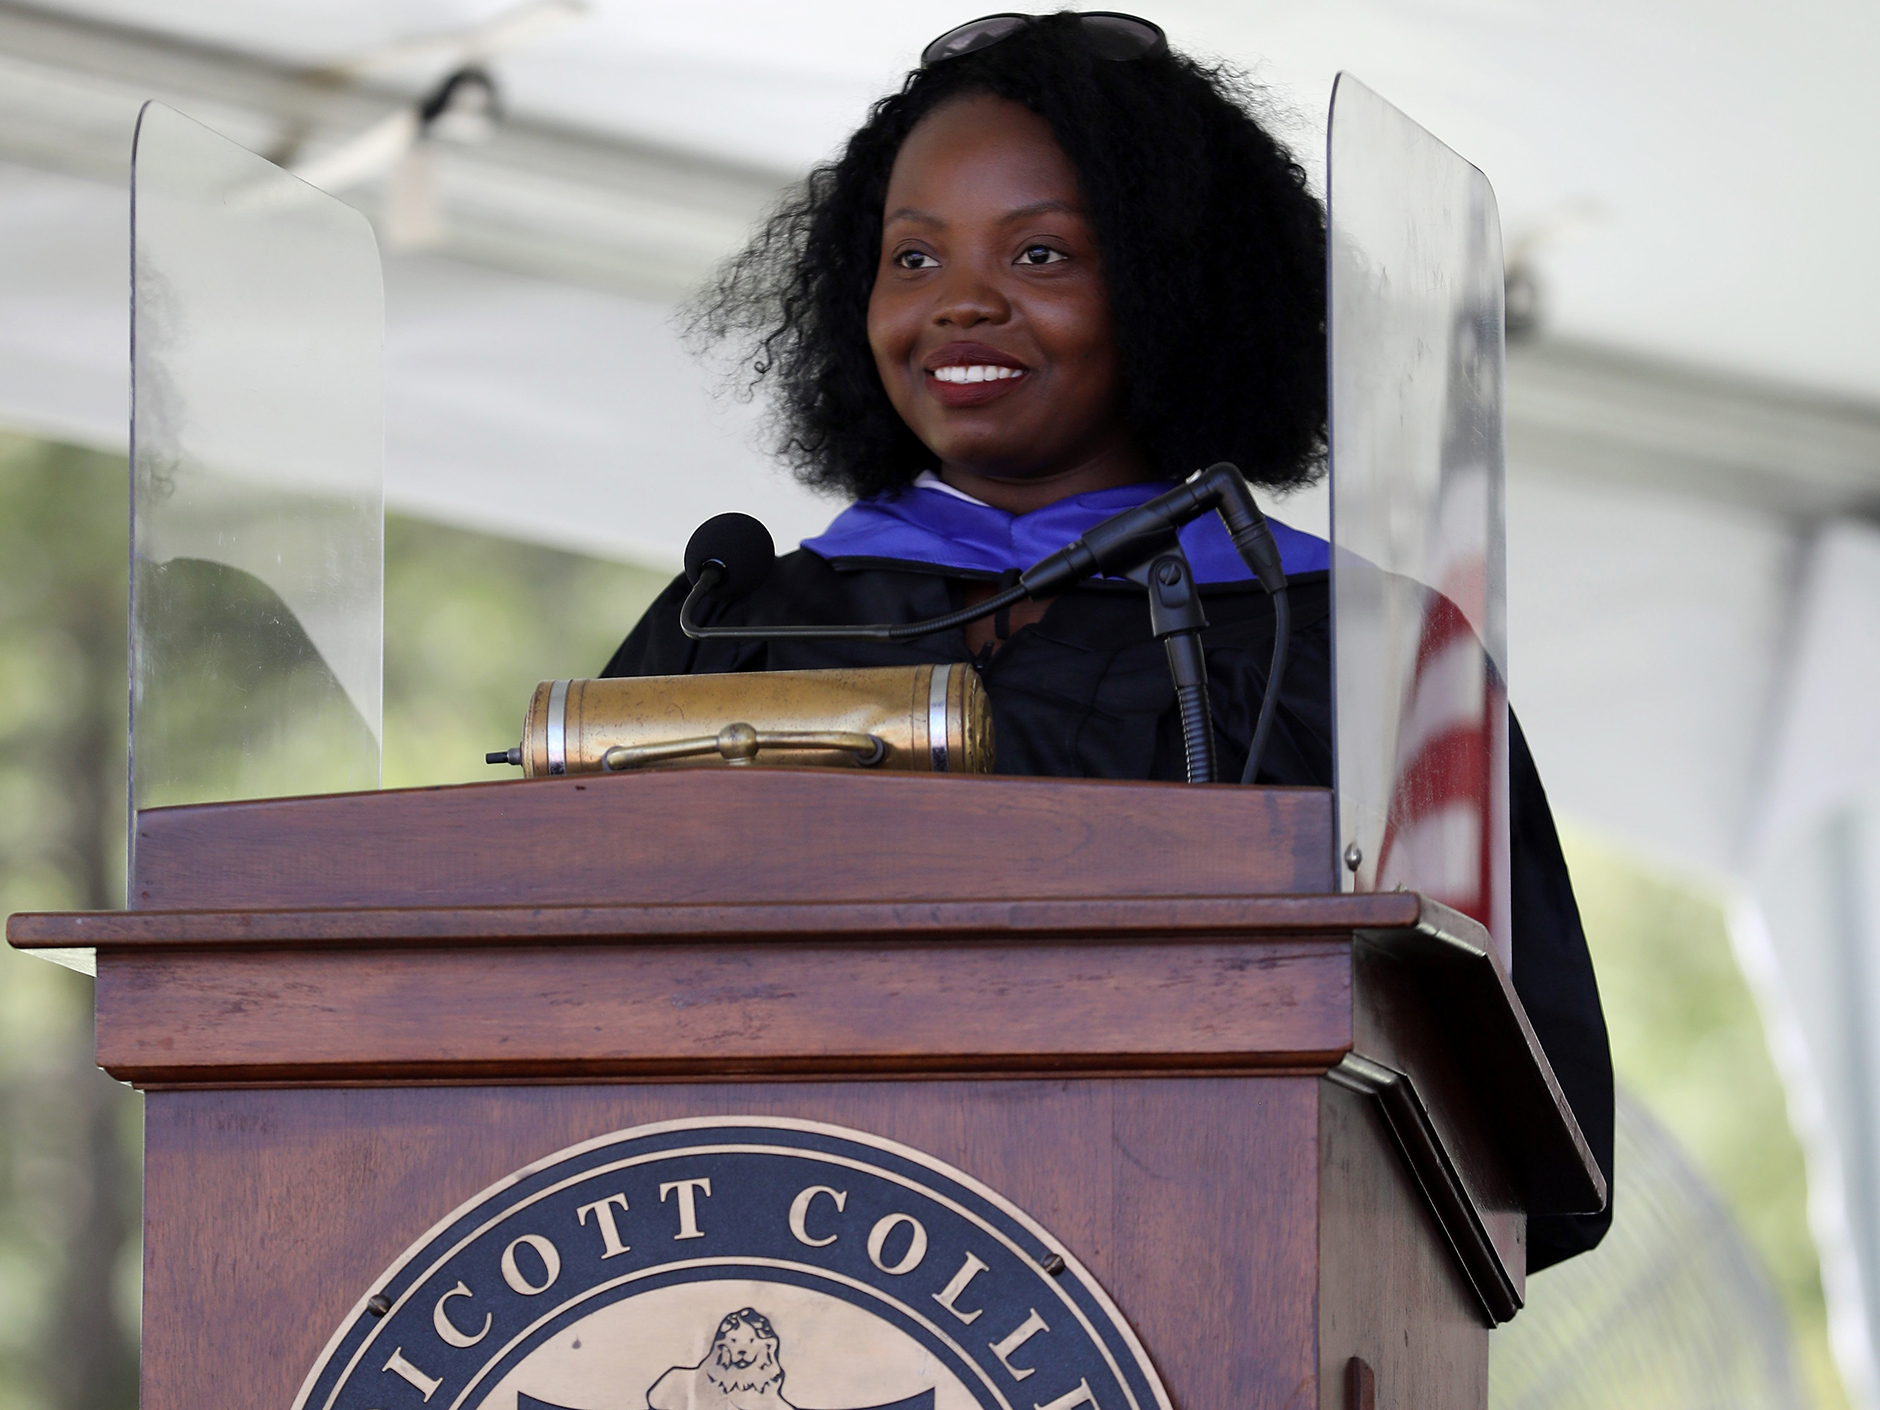 Since coming to the U.S. in 2009, Sherley Belizaire has gone from not speaking any English to being an Endicott Boston alumna and lead teacher at a YMCA. 